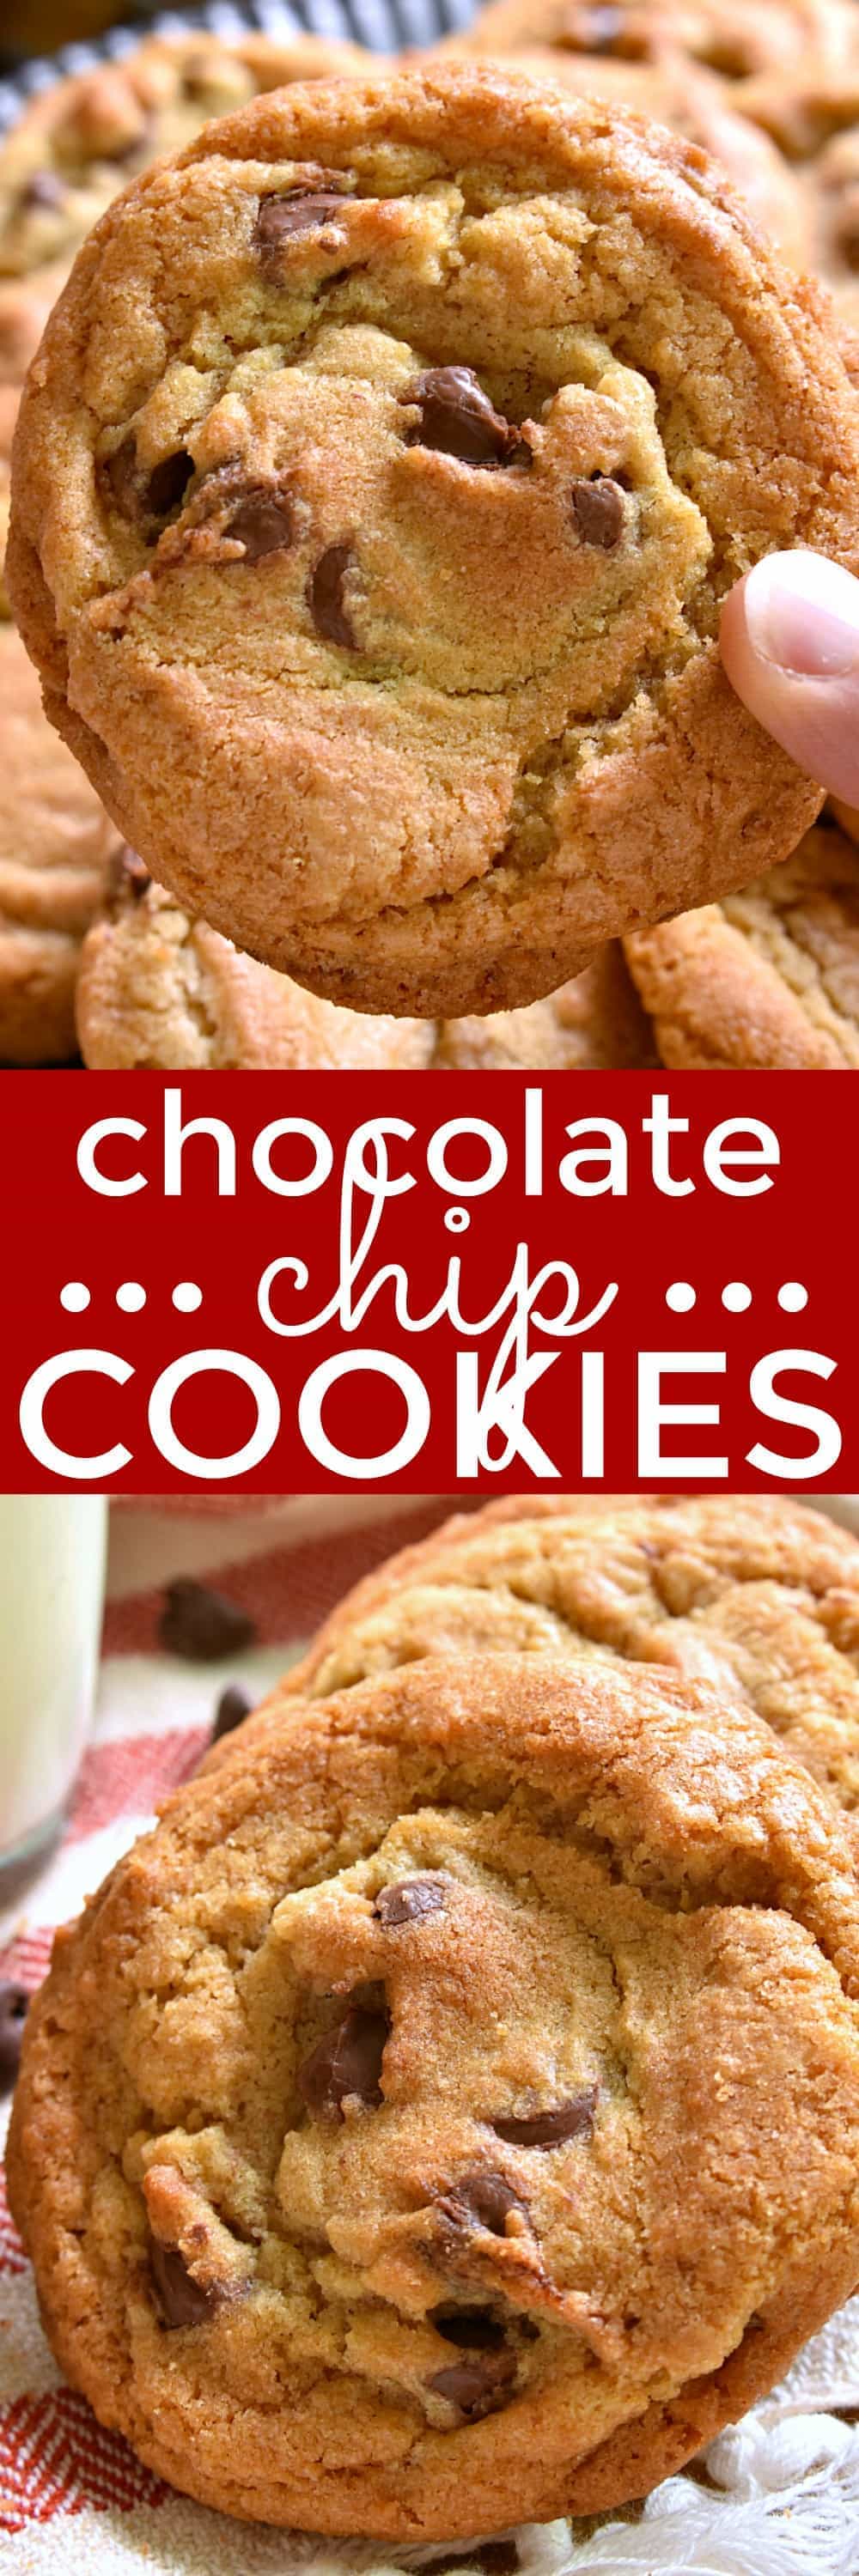 These Chocolate Chip Cookies are seriously the best!! Thick, chewy, and perfectly golden brown, once you try them, your search for the perfect chocolate chip cookie will be over. Guaranteed!